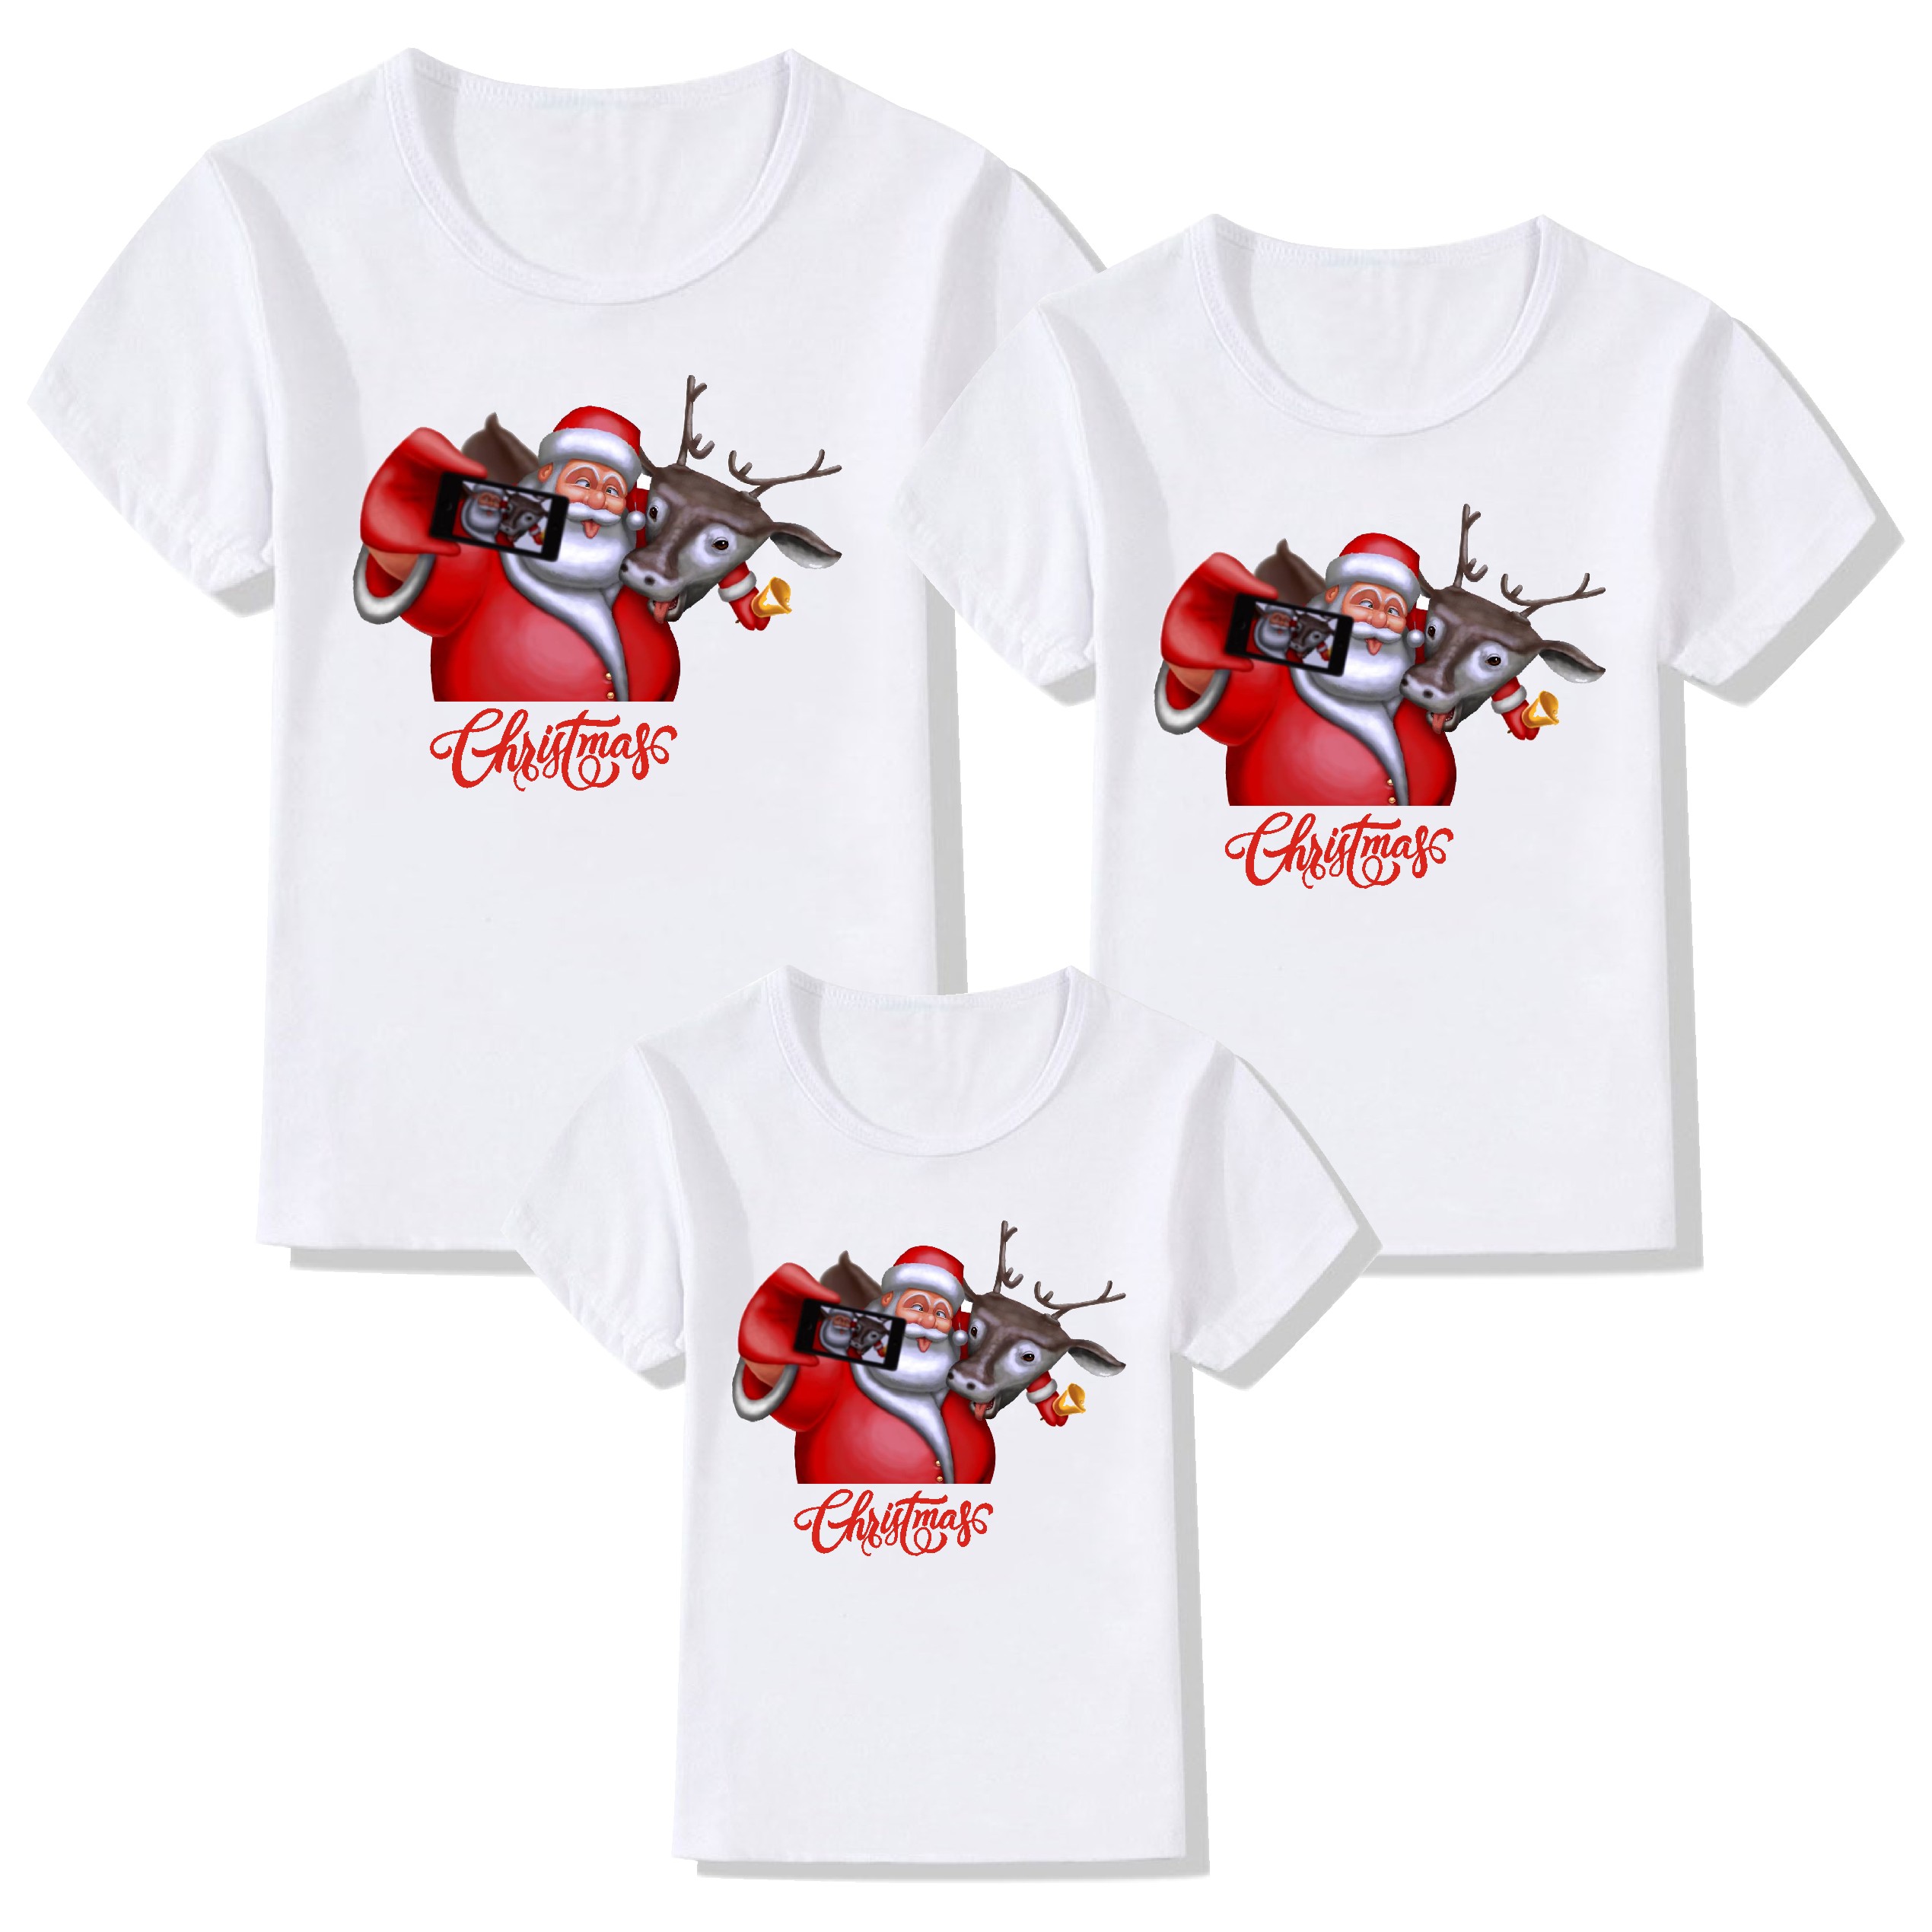 2020 Dad Mom Baby Christmas Clothing Family Matching Outfits Clothes Mother Daughter Father Son Look Mommy and Me T-Shirt Set